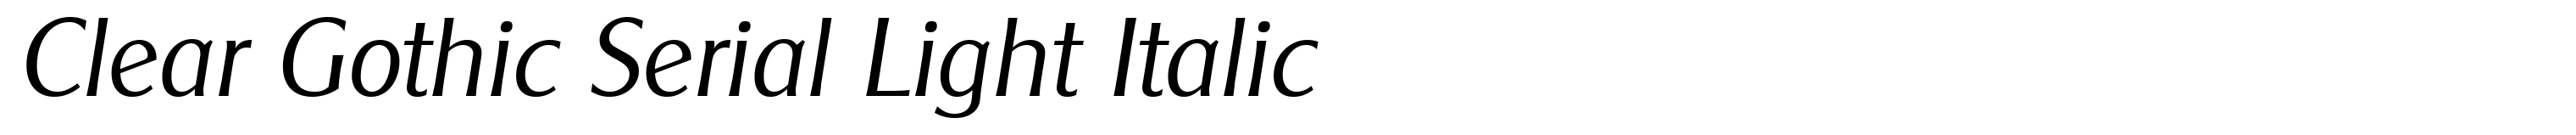 Clear Gothic Serial Light Italic